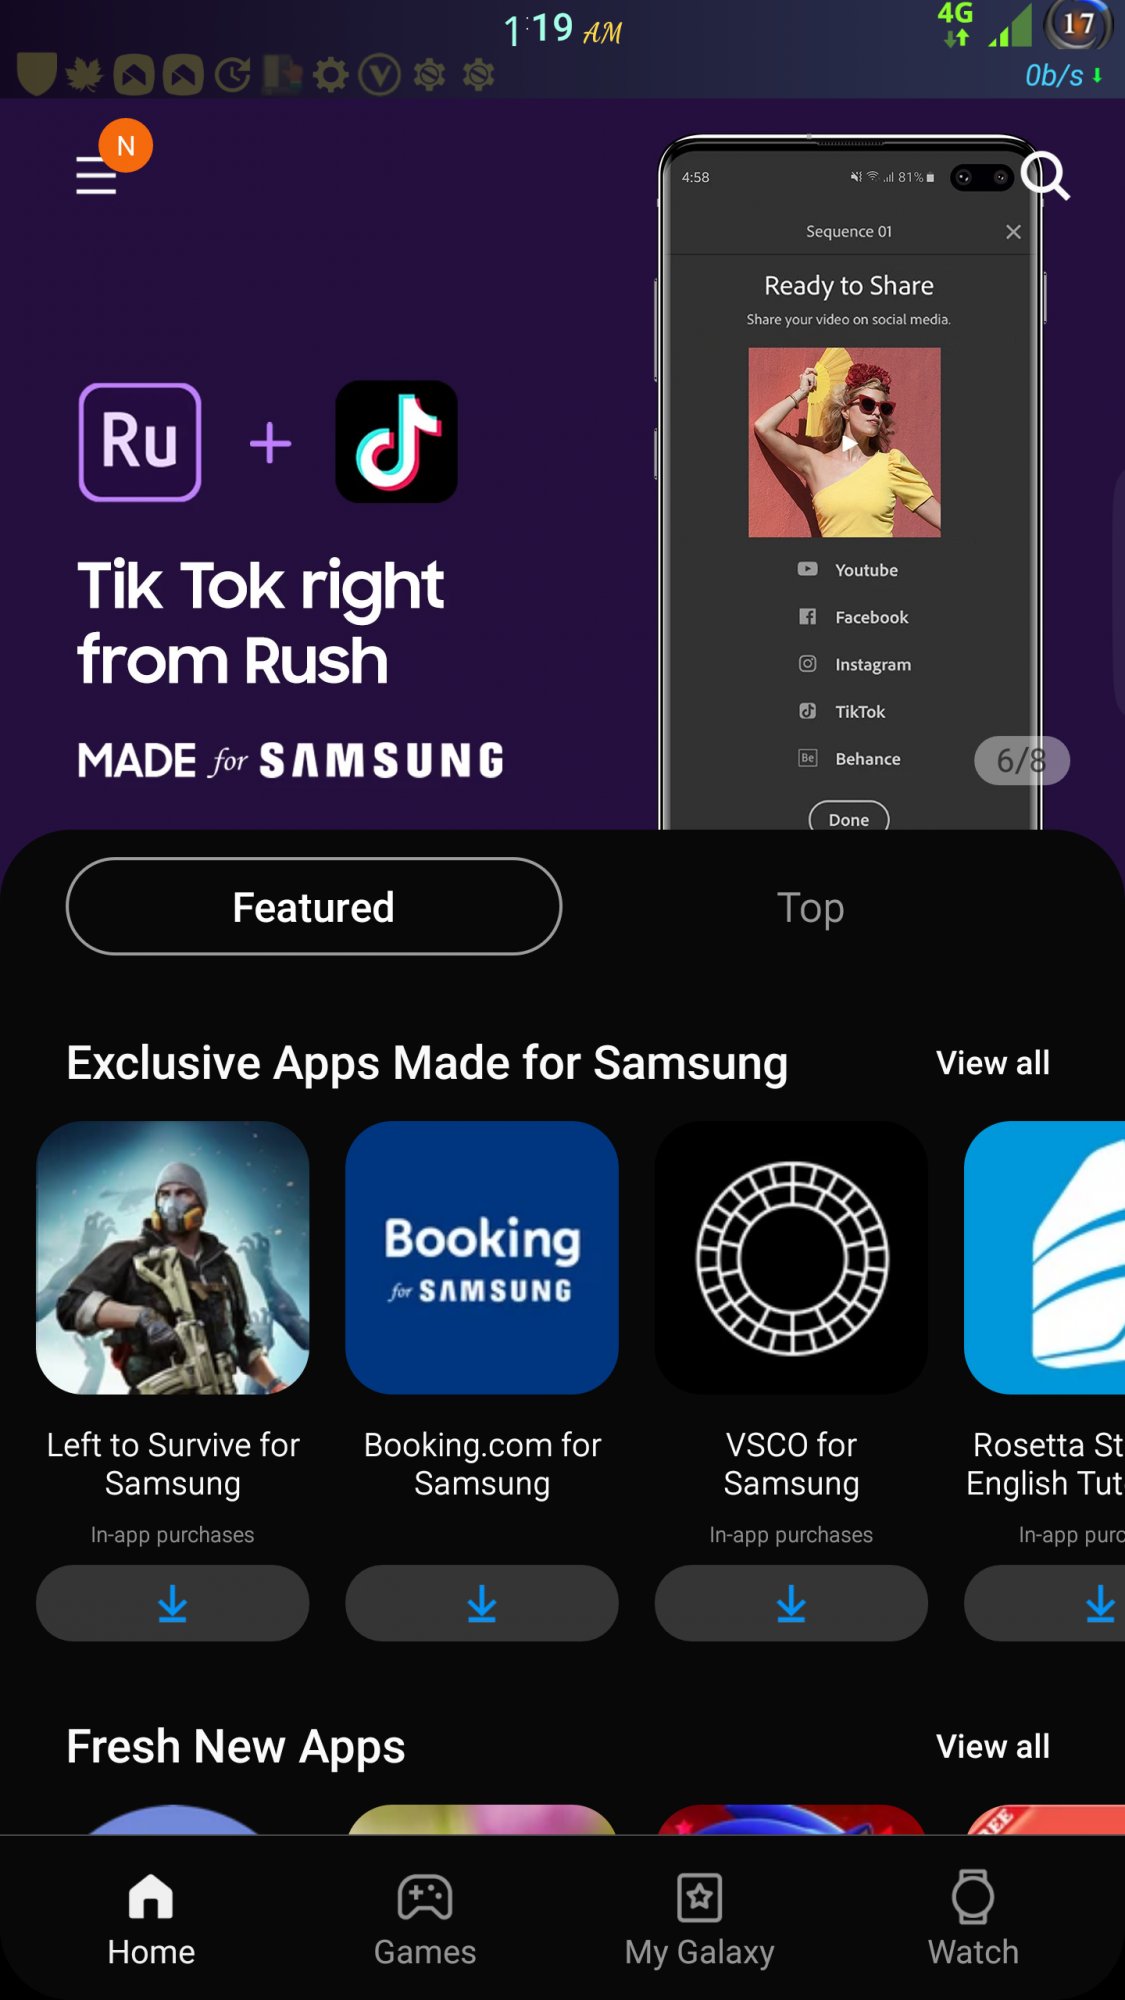 Galaxy Store update brings dark mode and One UI design - Android Apps